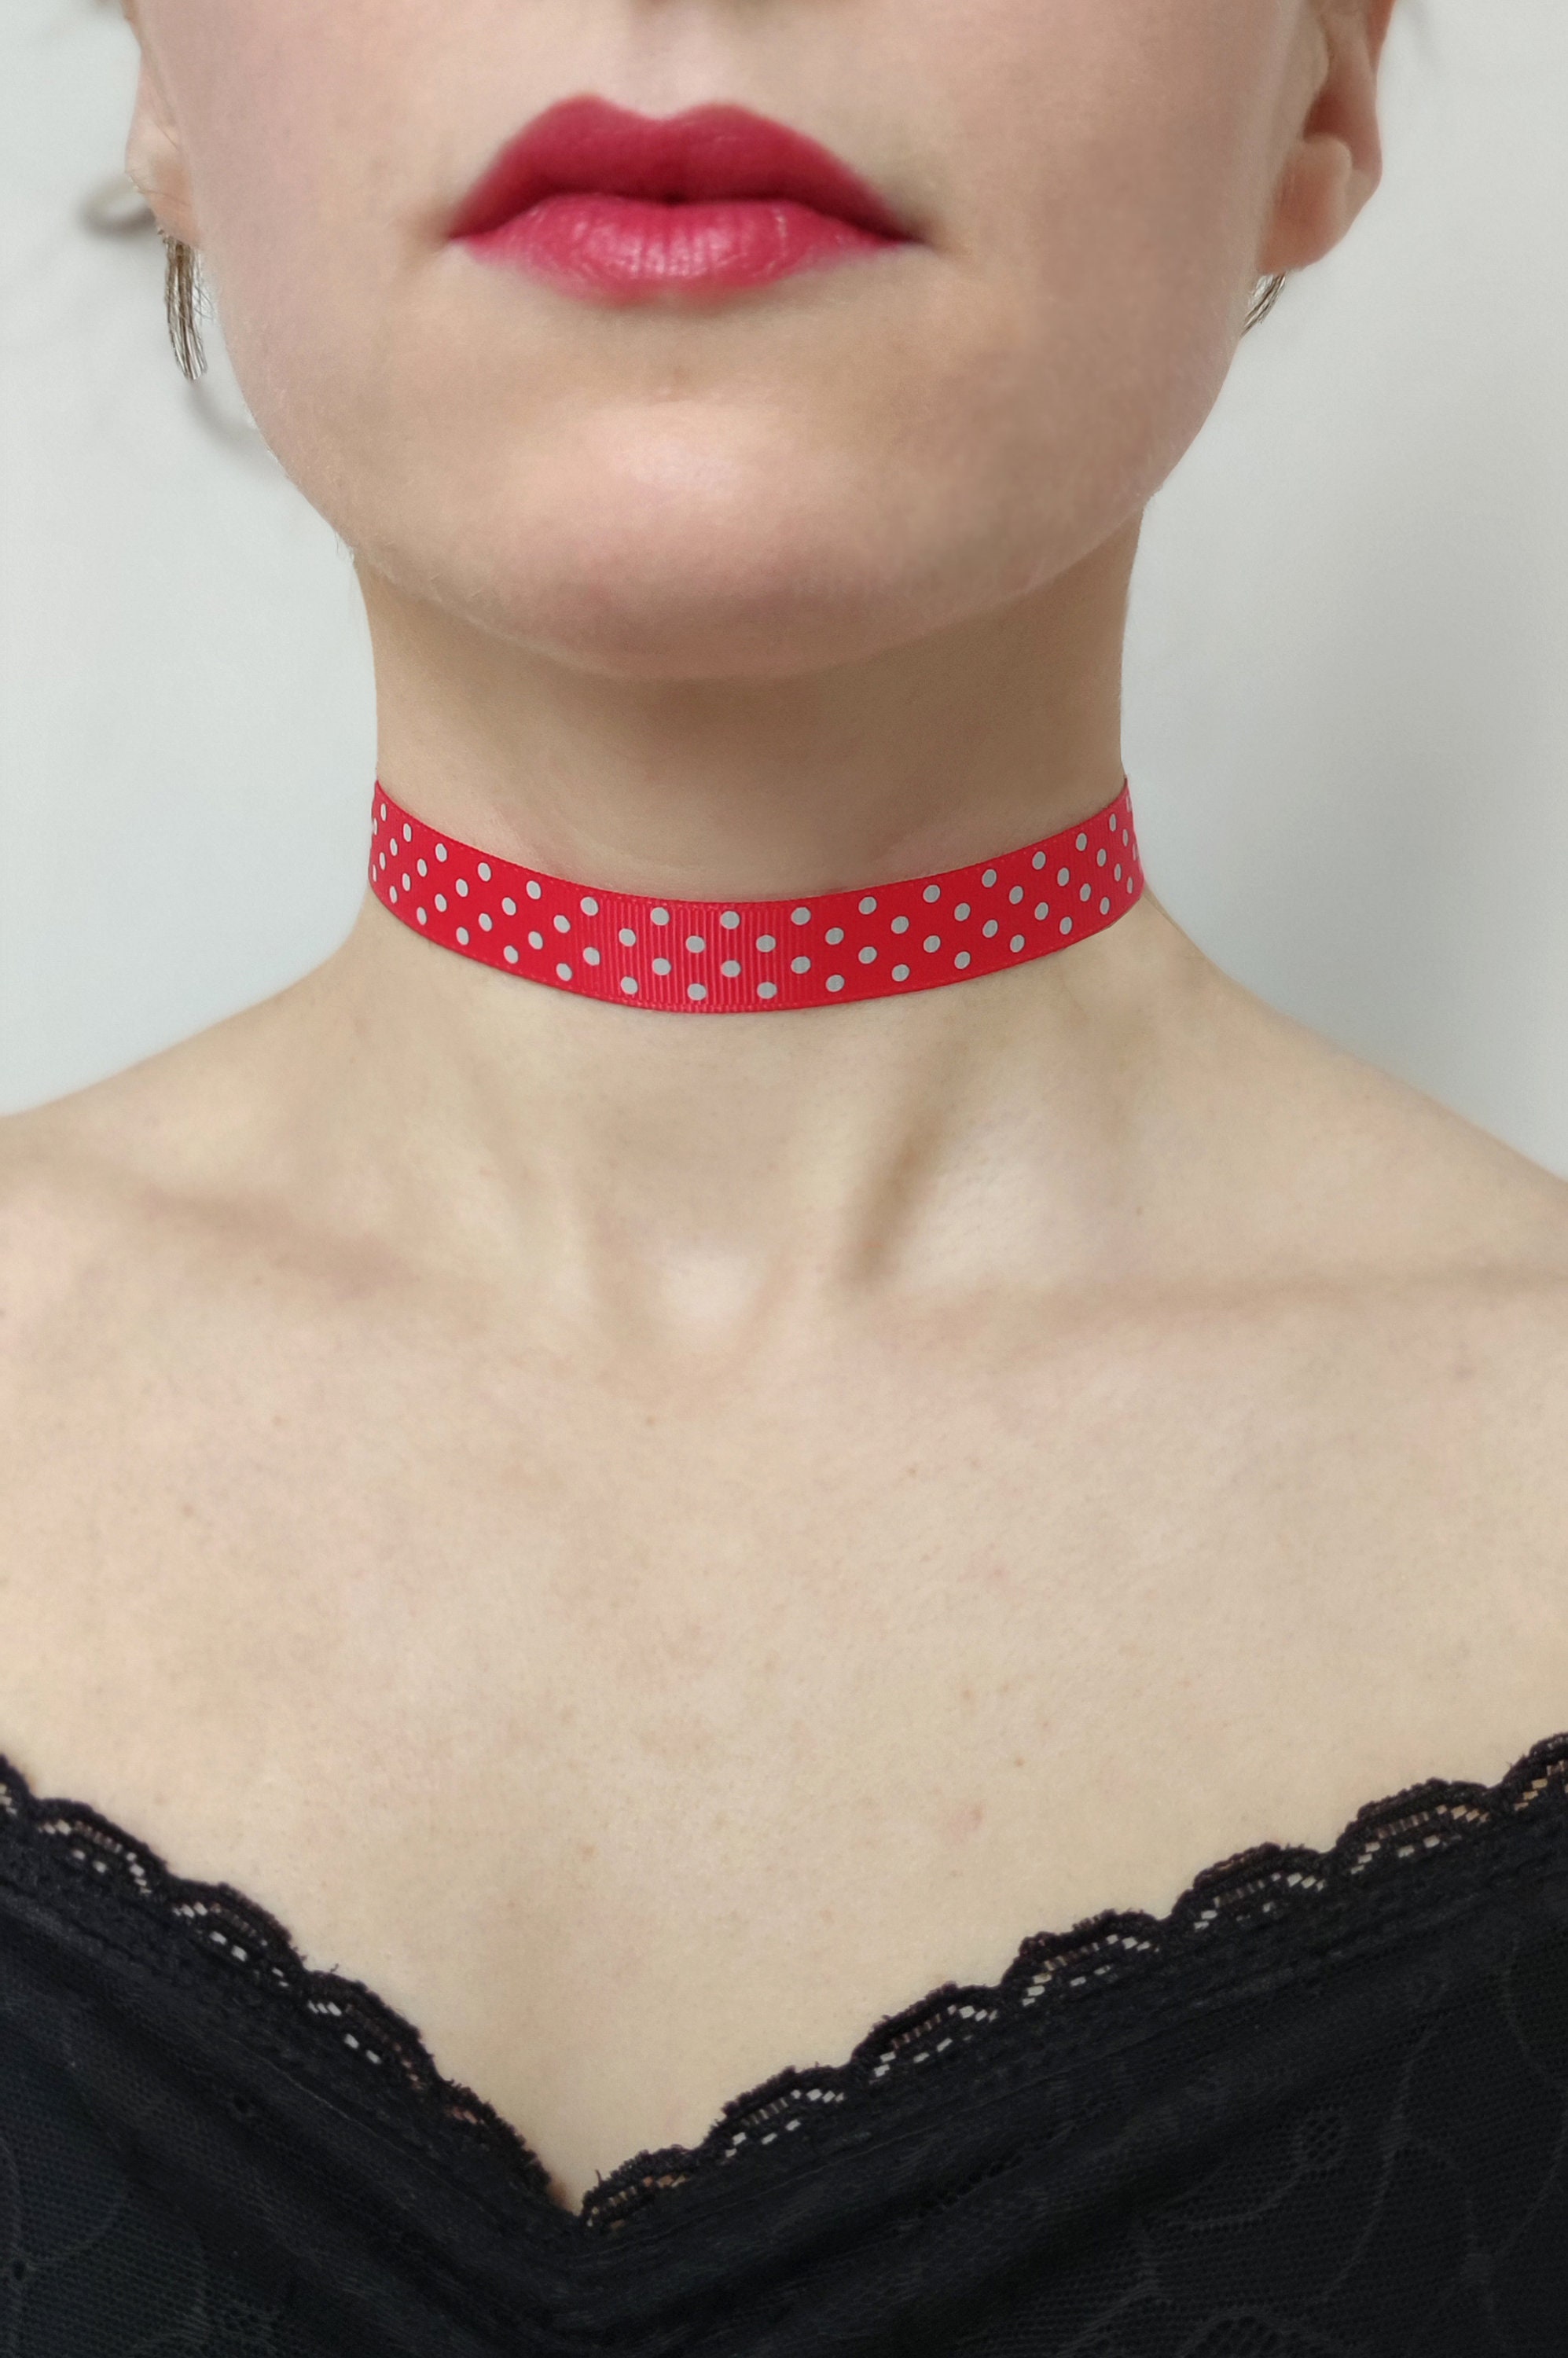 Red Choker/Thick Red Chokers/ Spring Necklace/Glittery Choker/ SpringChoker/Glitter Choker/Large Red Choker/RedAdjustable